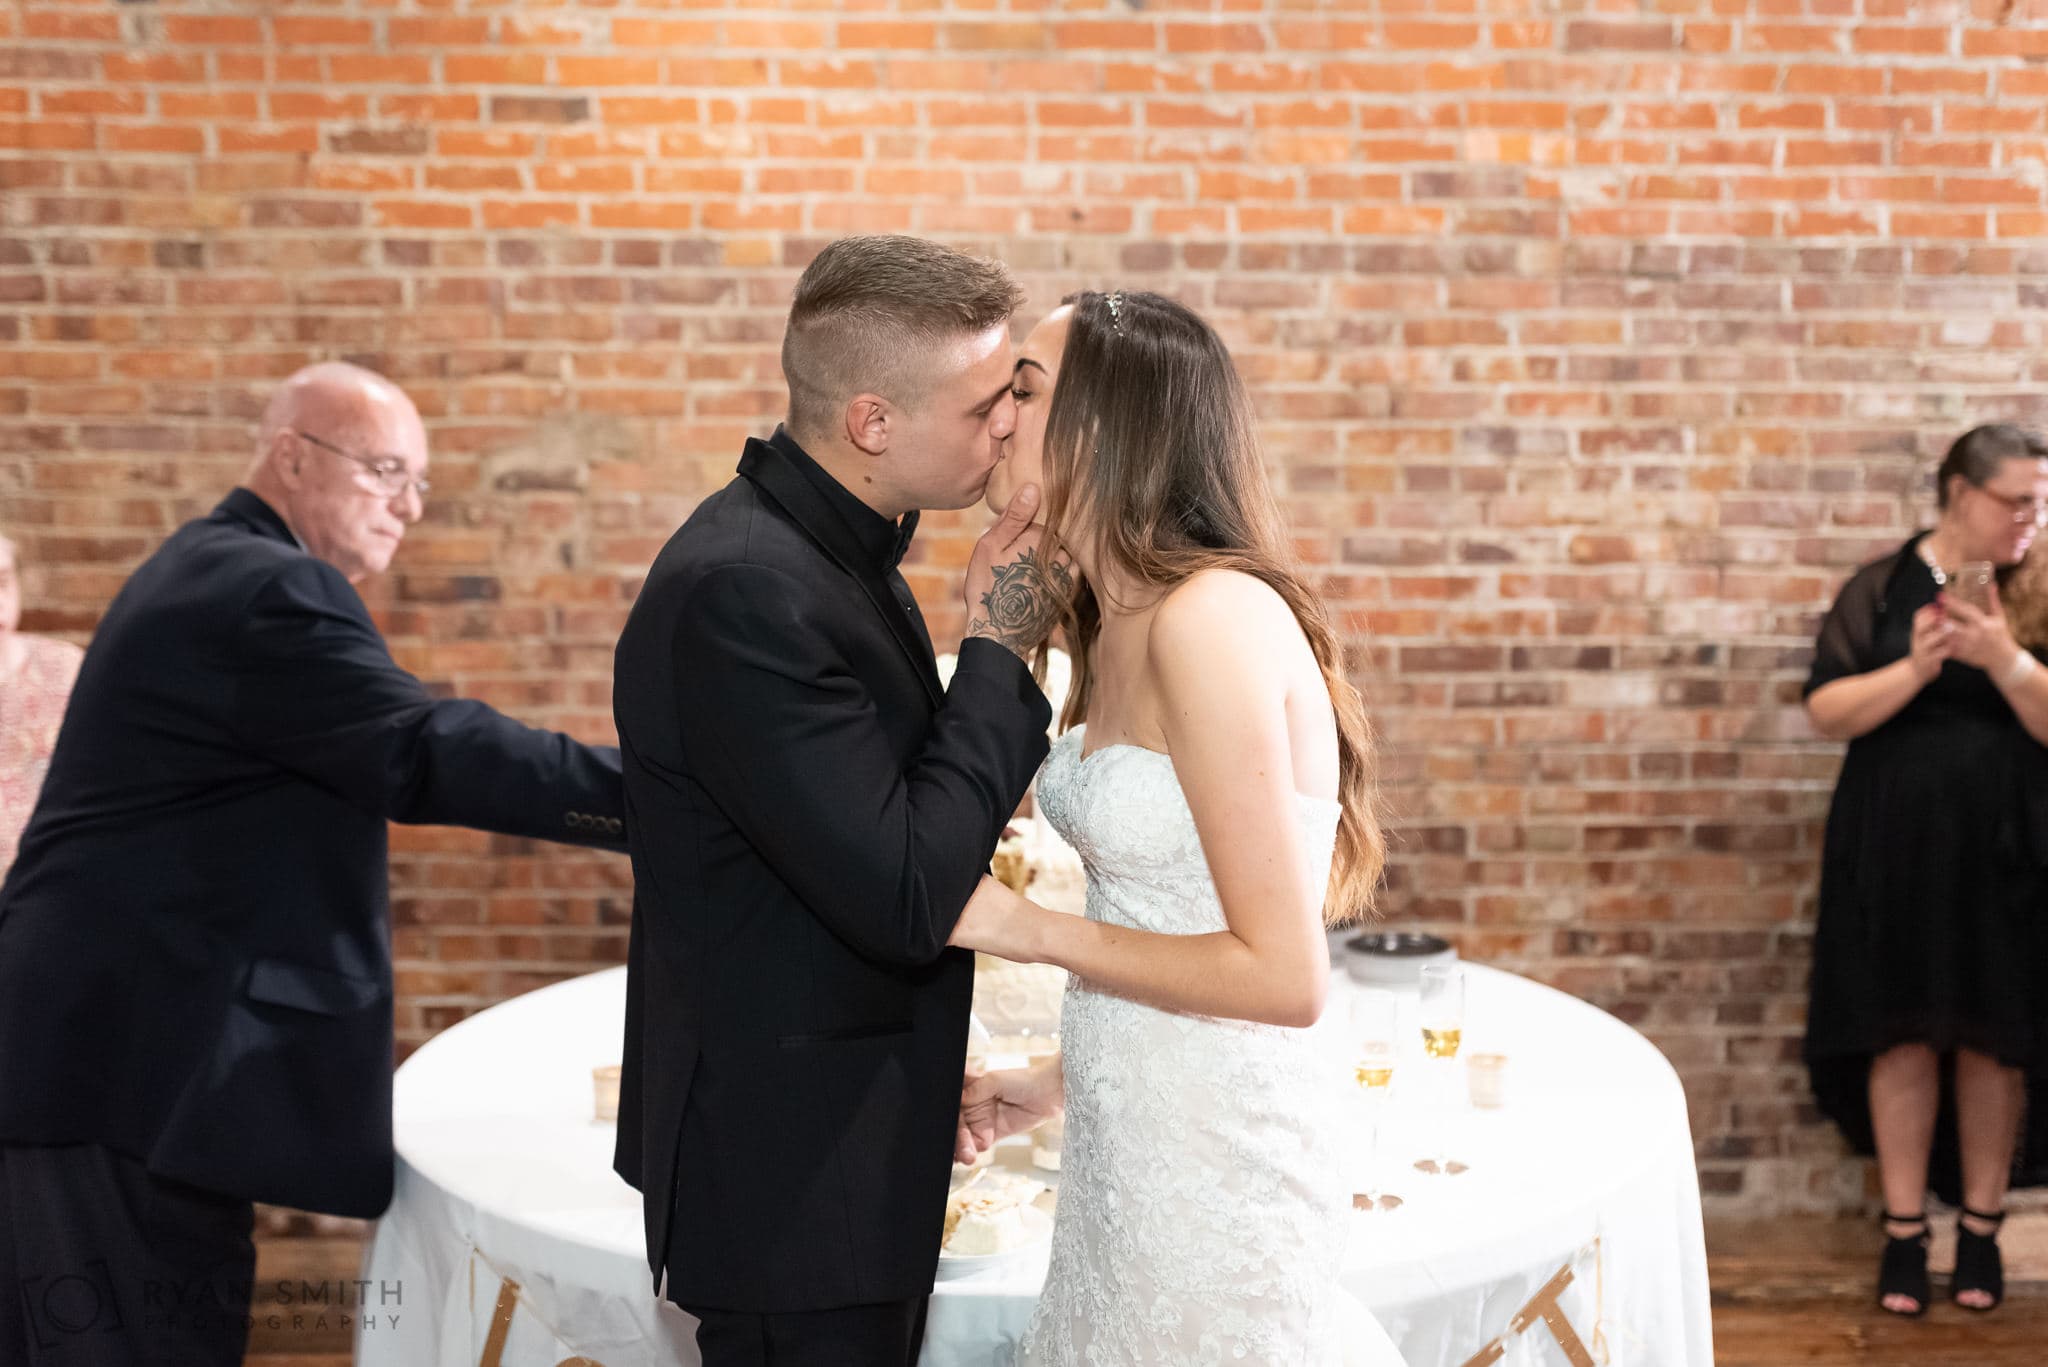 Kiss after cake cutting - 104 Laurel St